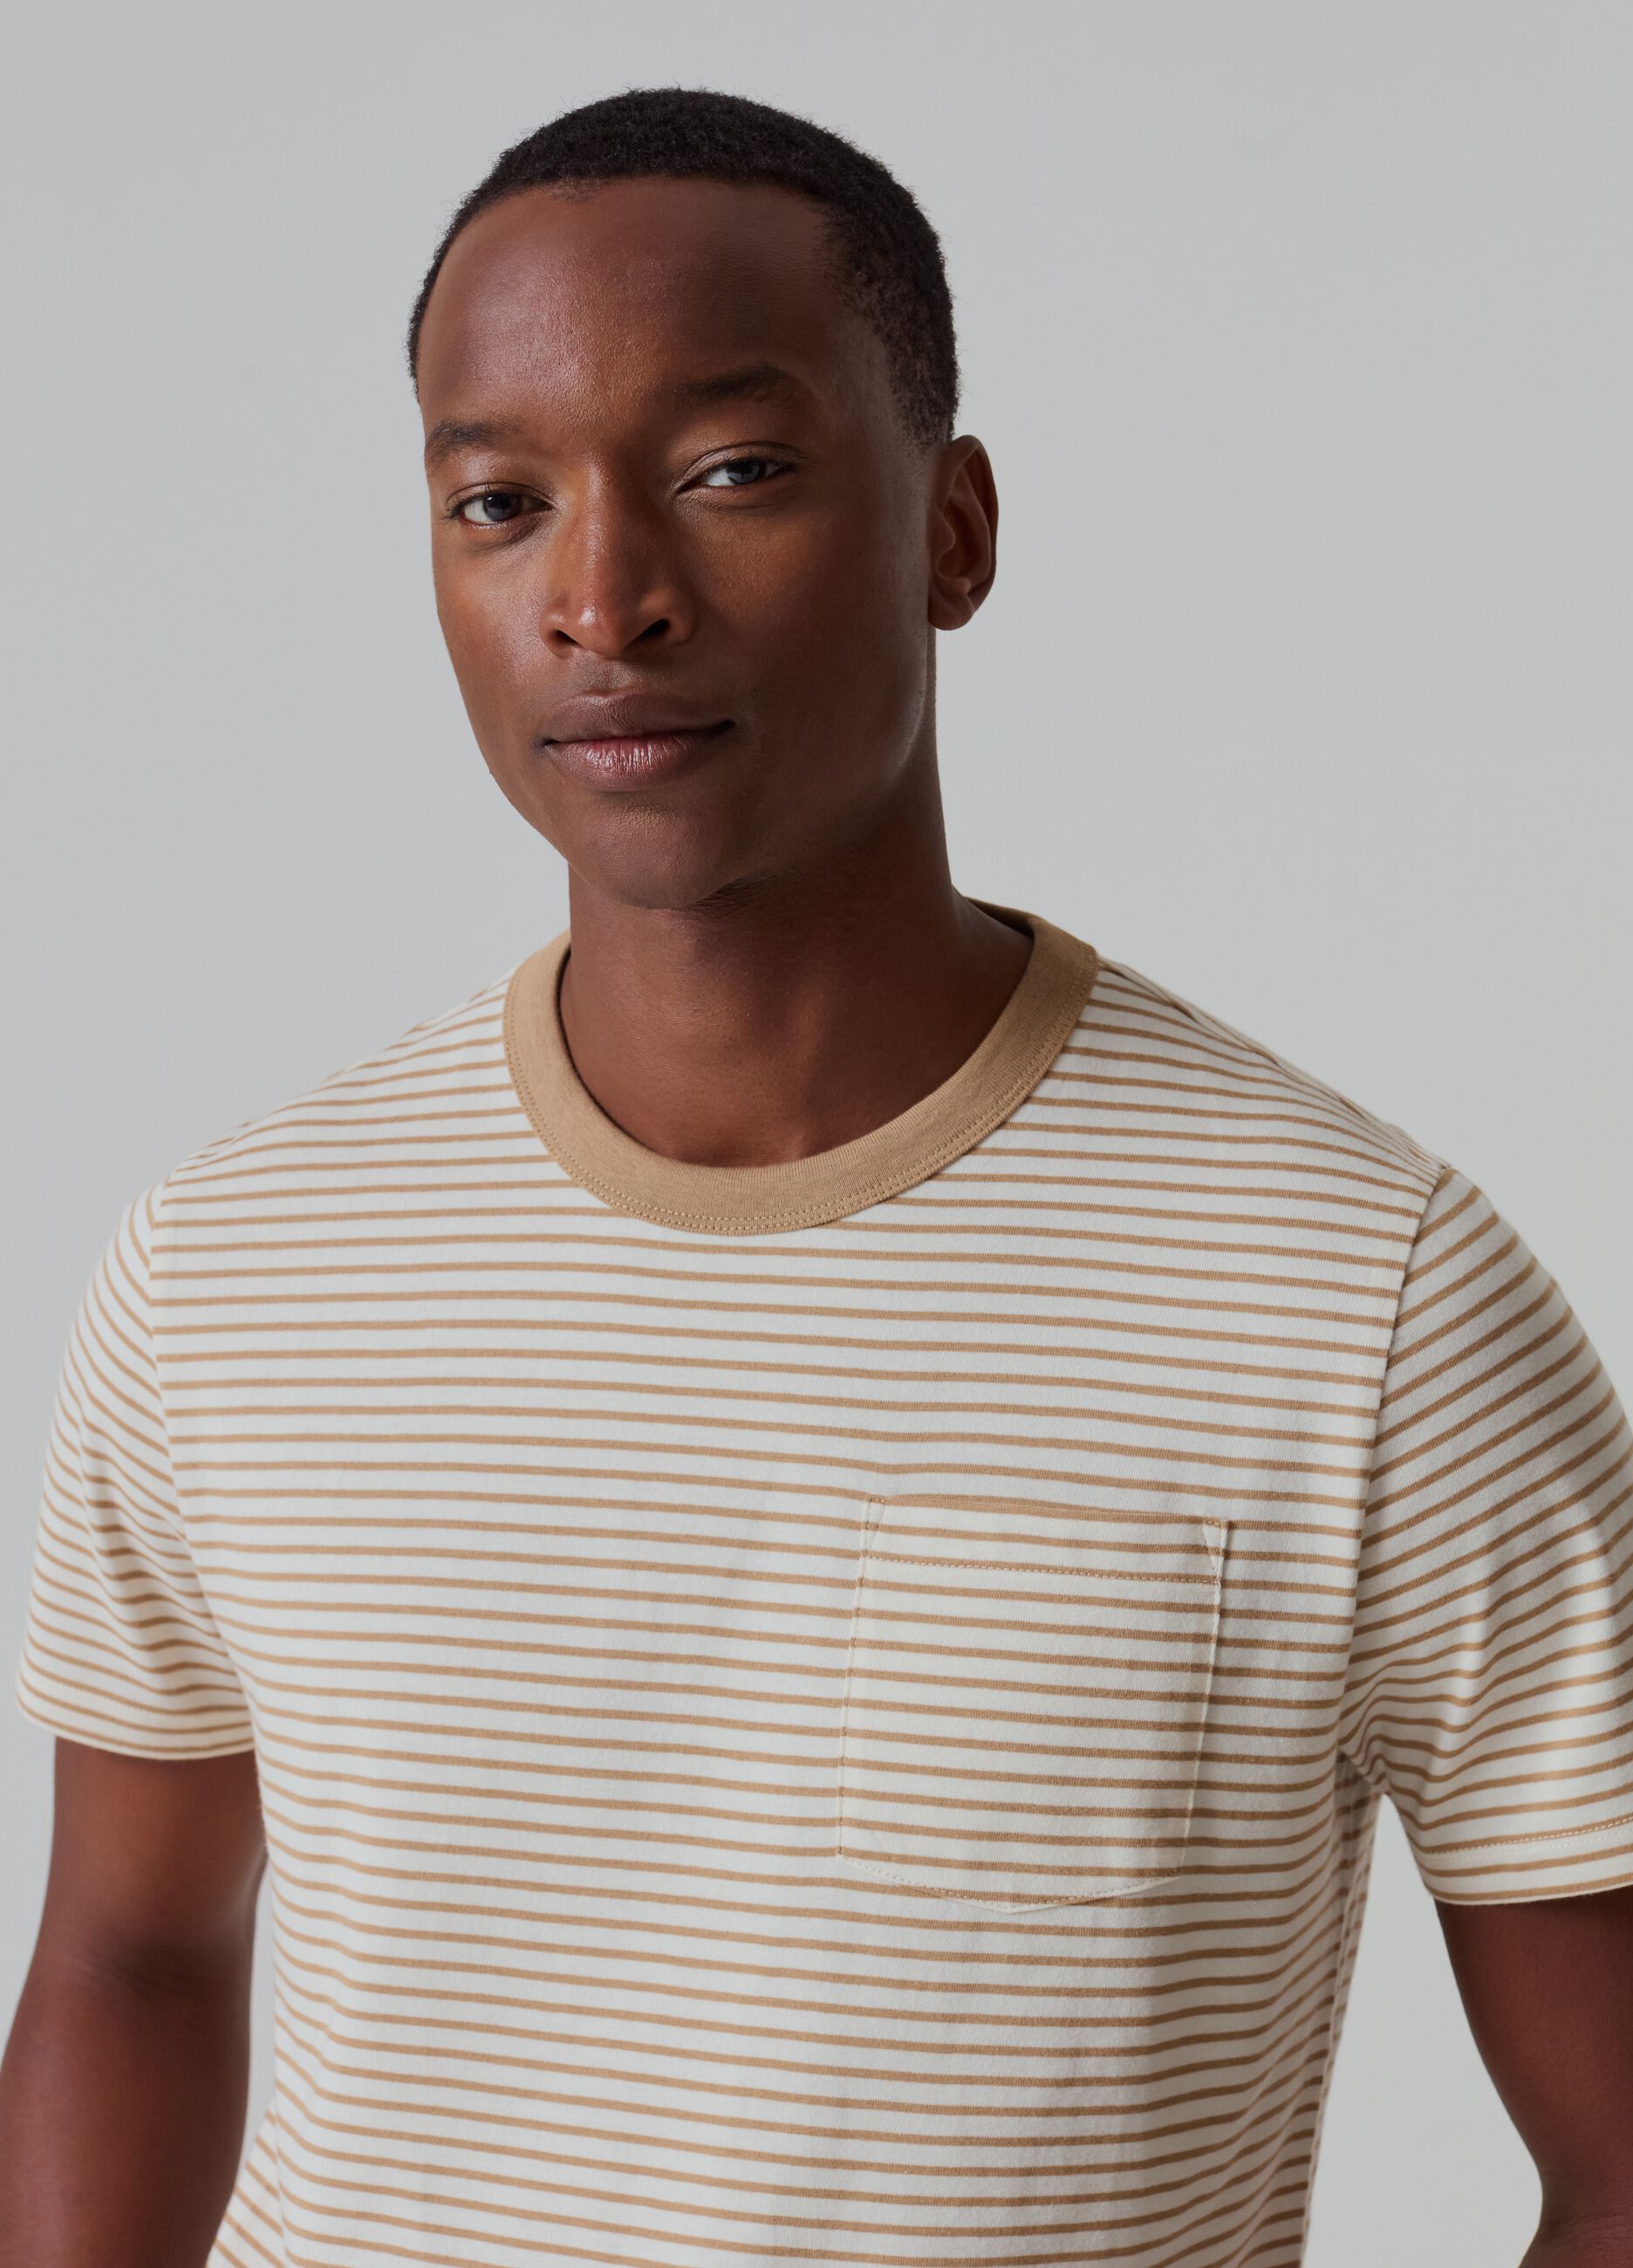 Striped T-shirt with pocket